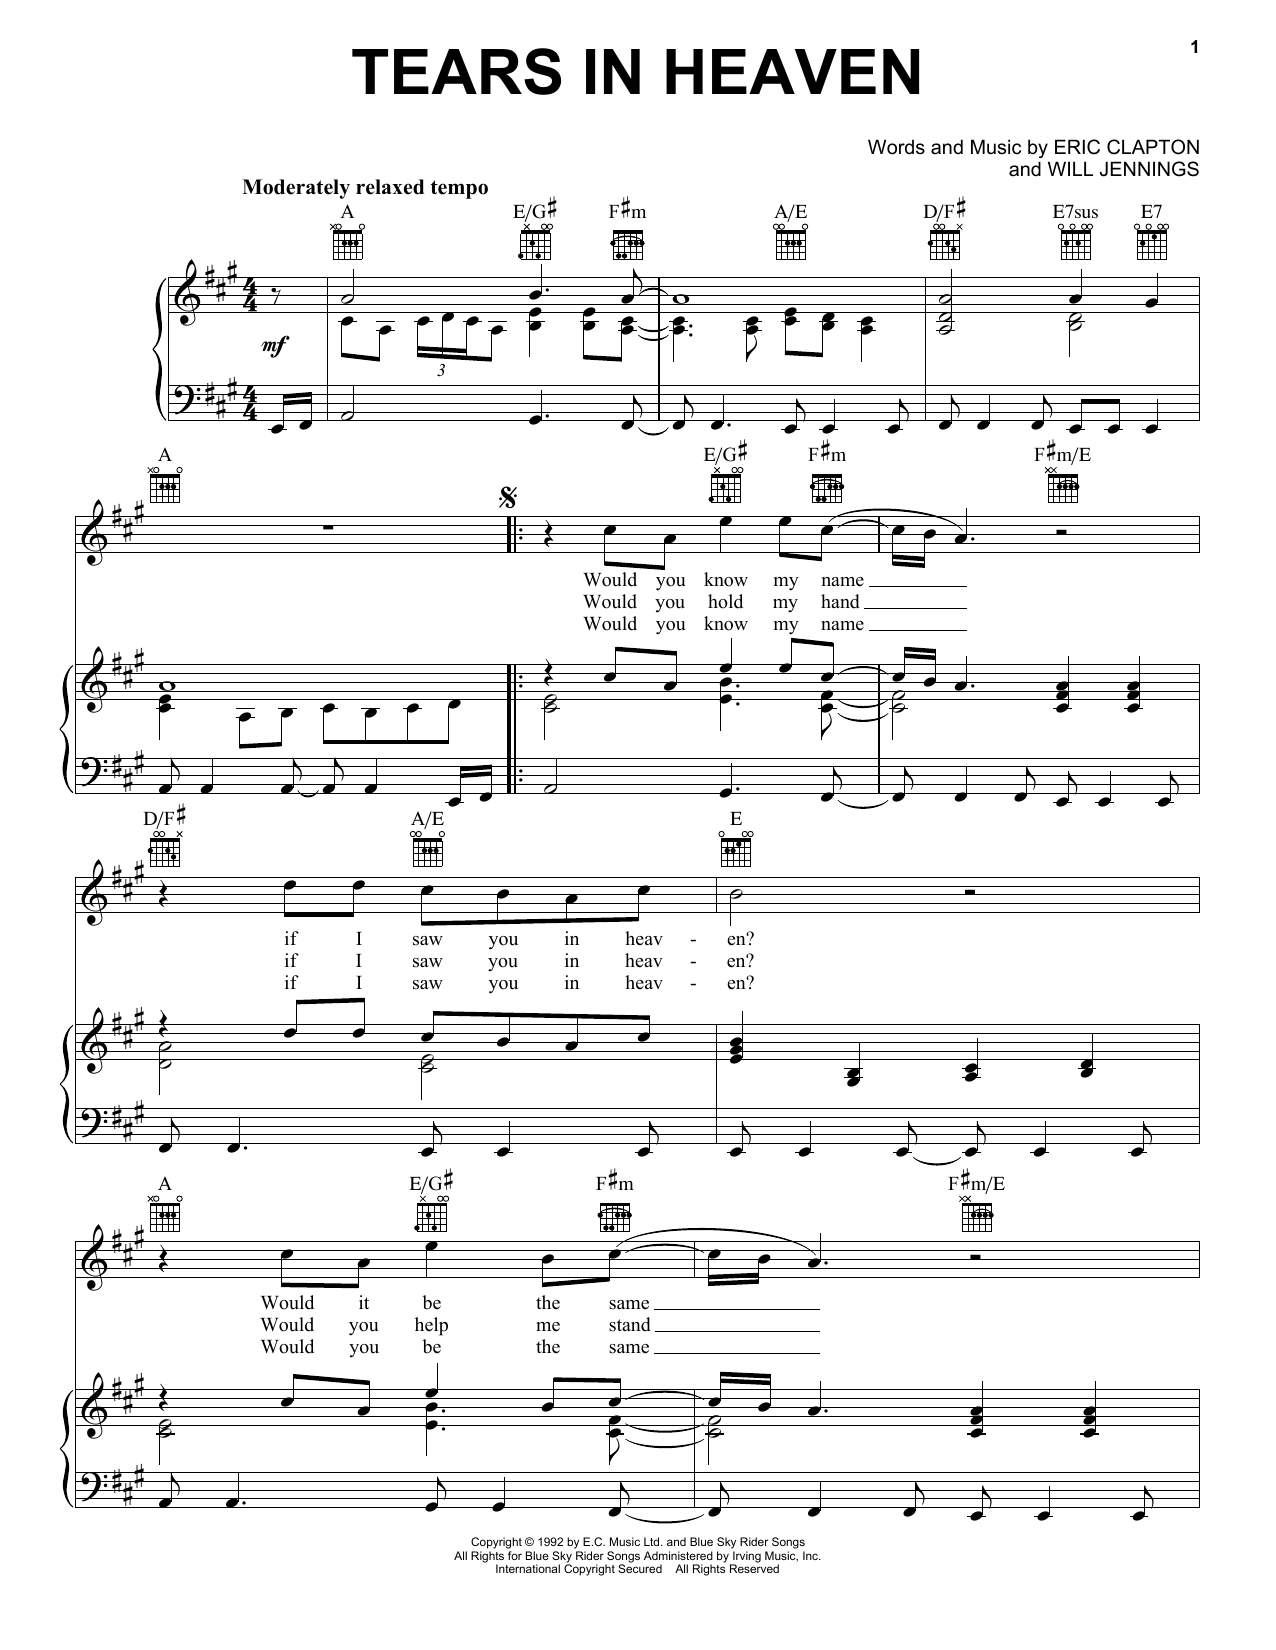 Eric Clapton Tears In Heaven sheet music notes and chords. Download Printable PDF.